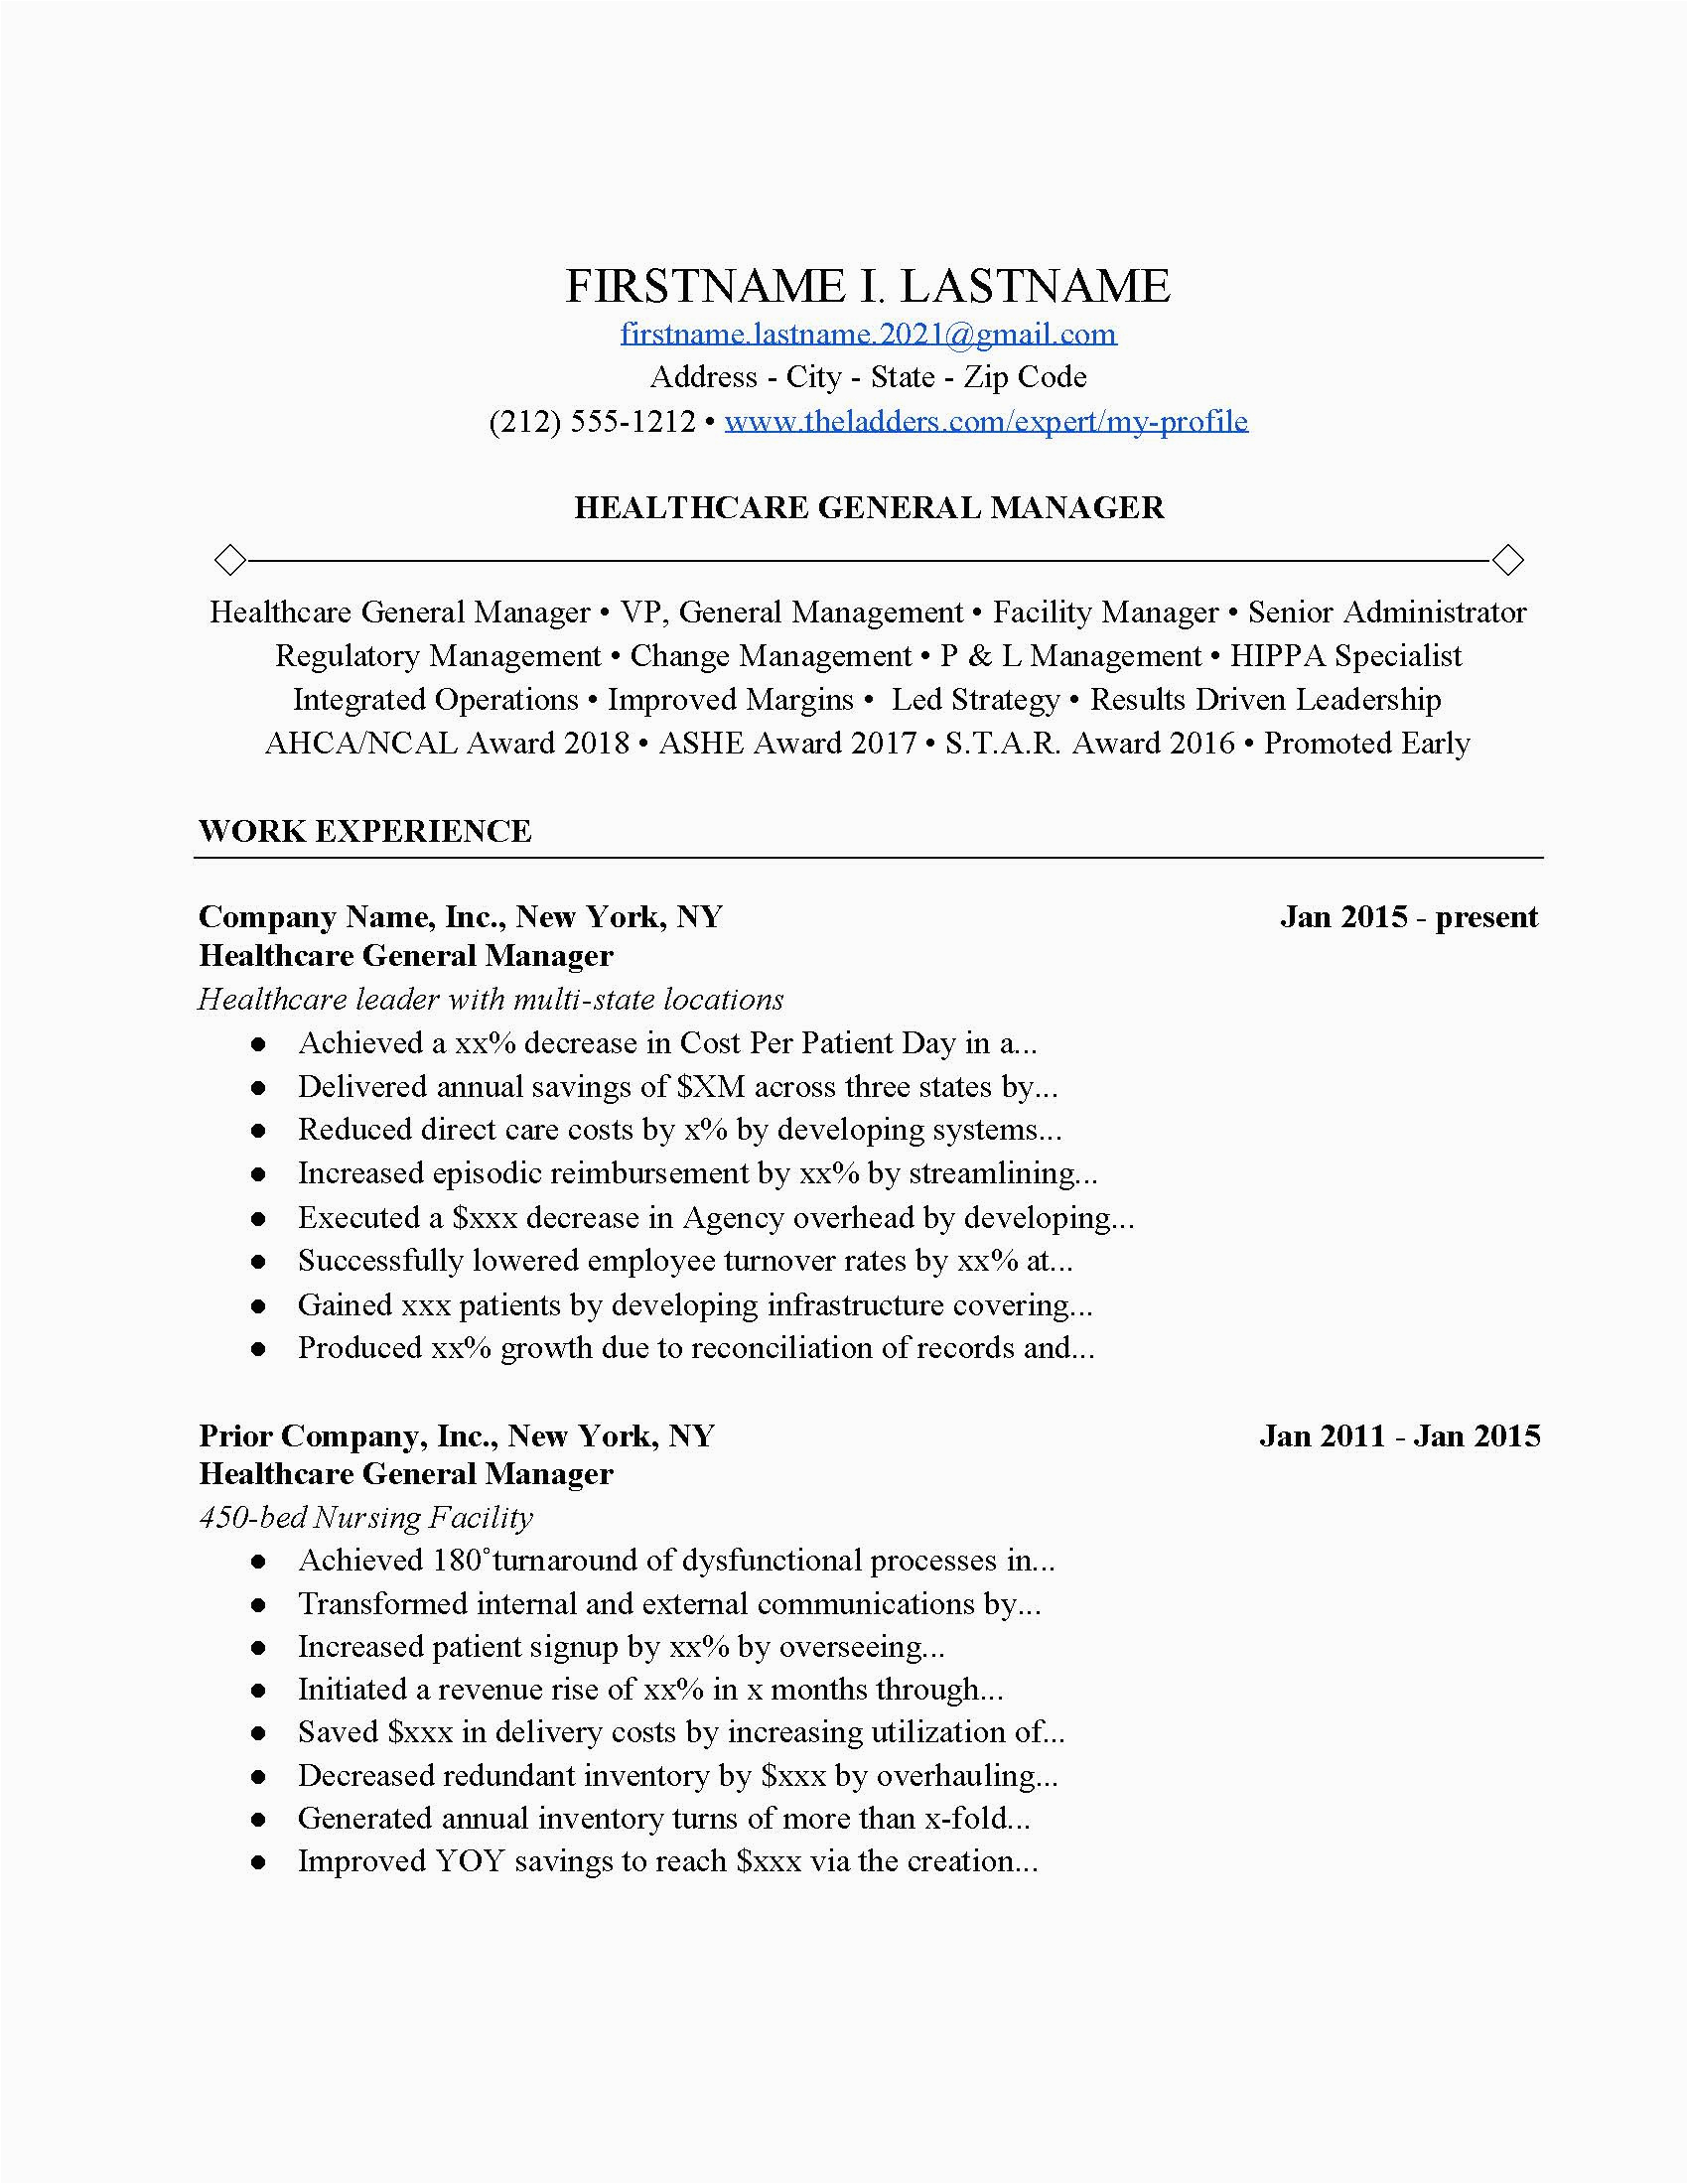 Healthcare Domain Base Payer Resume Sample Healthcare General Manager Resume Example